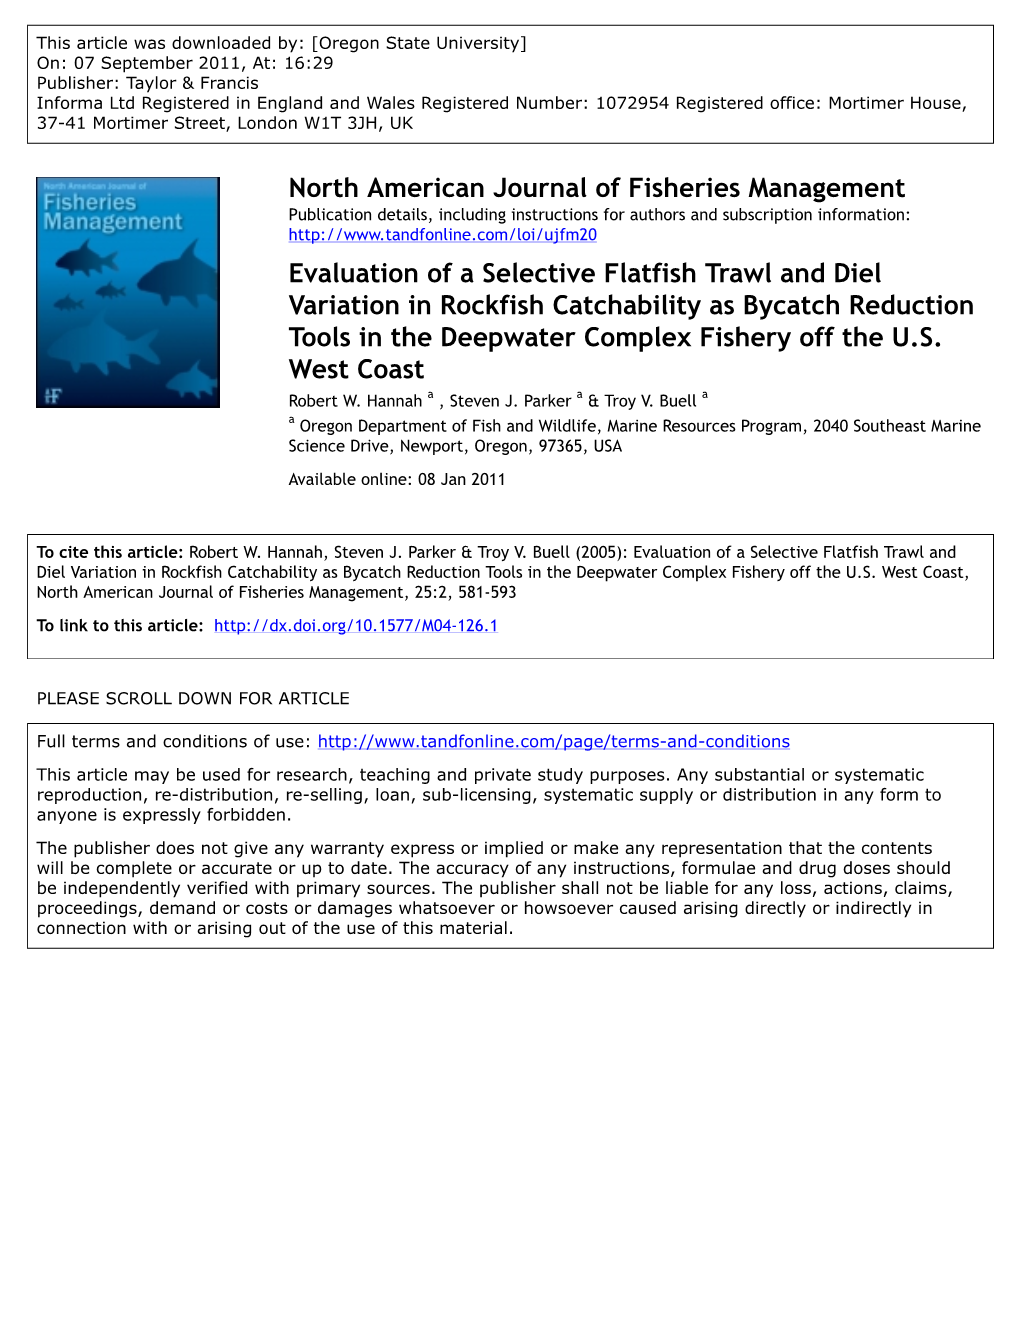 Evaluation of a Selective Flatfish Trawl and Diel Variation in Rockfish Catchability As Bycatch Reduction Tools in the Deepwater Complex Fishery Off the U.S